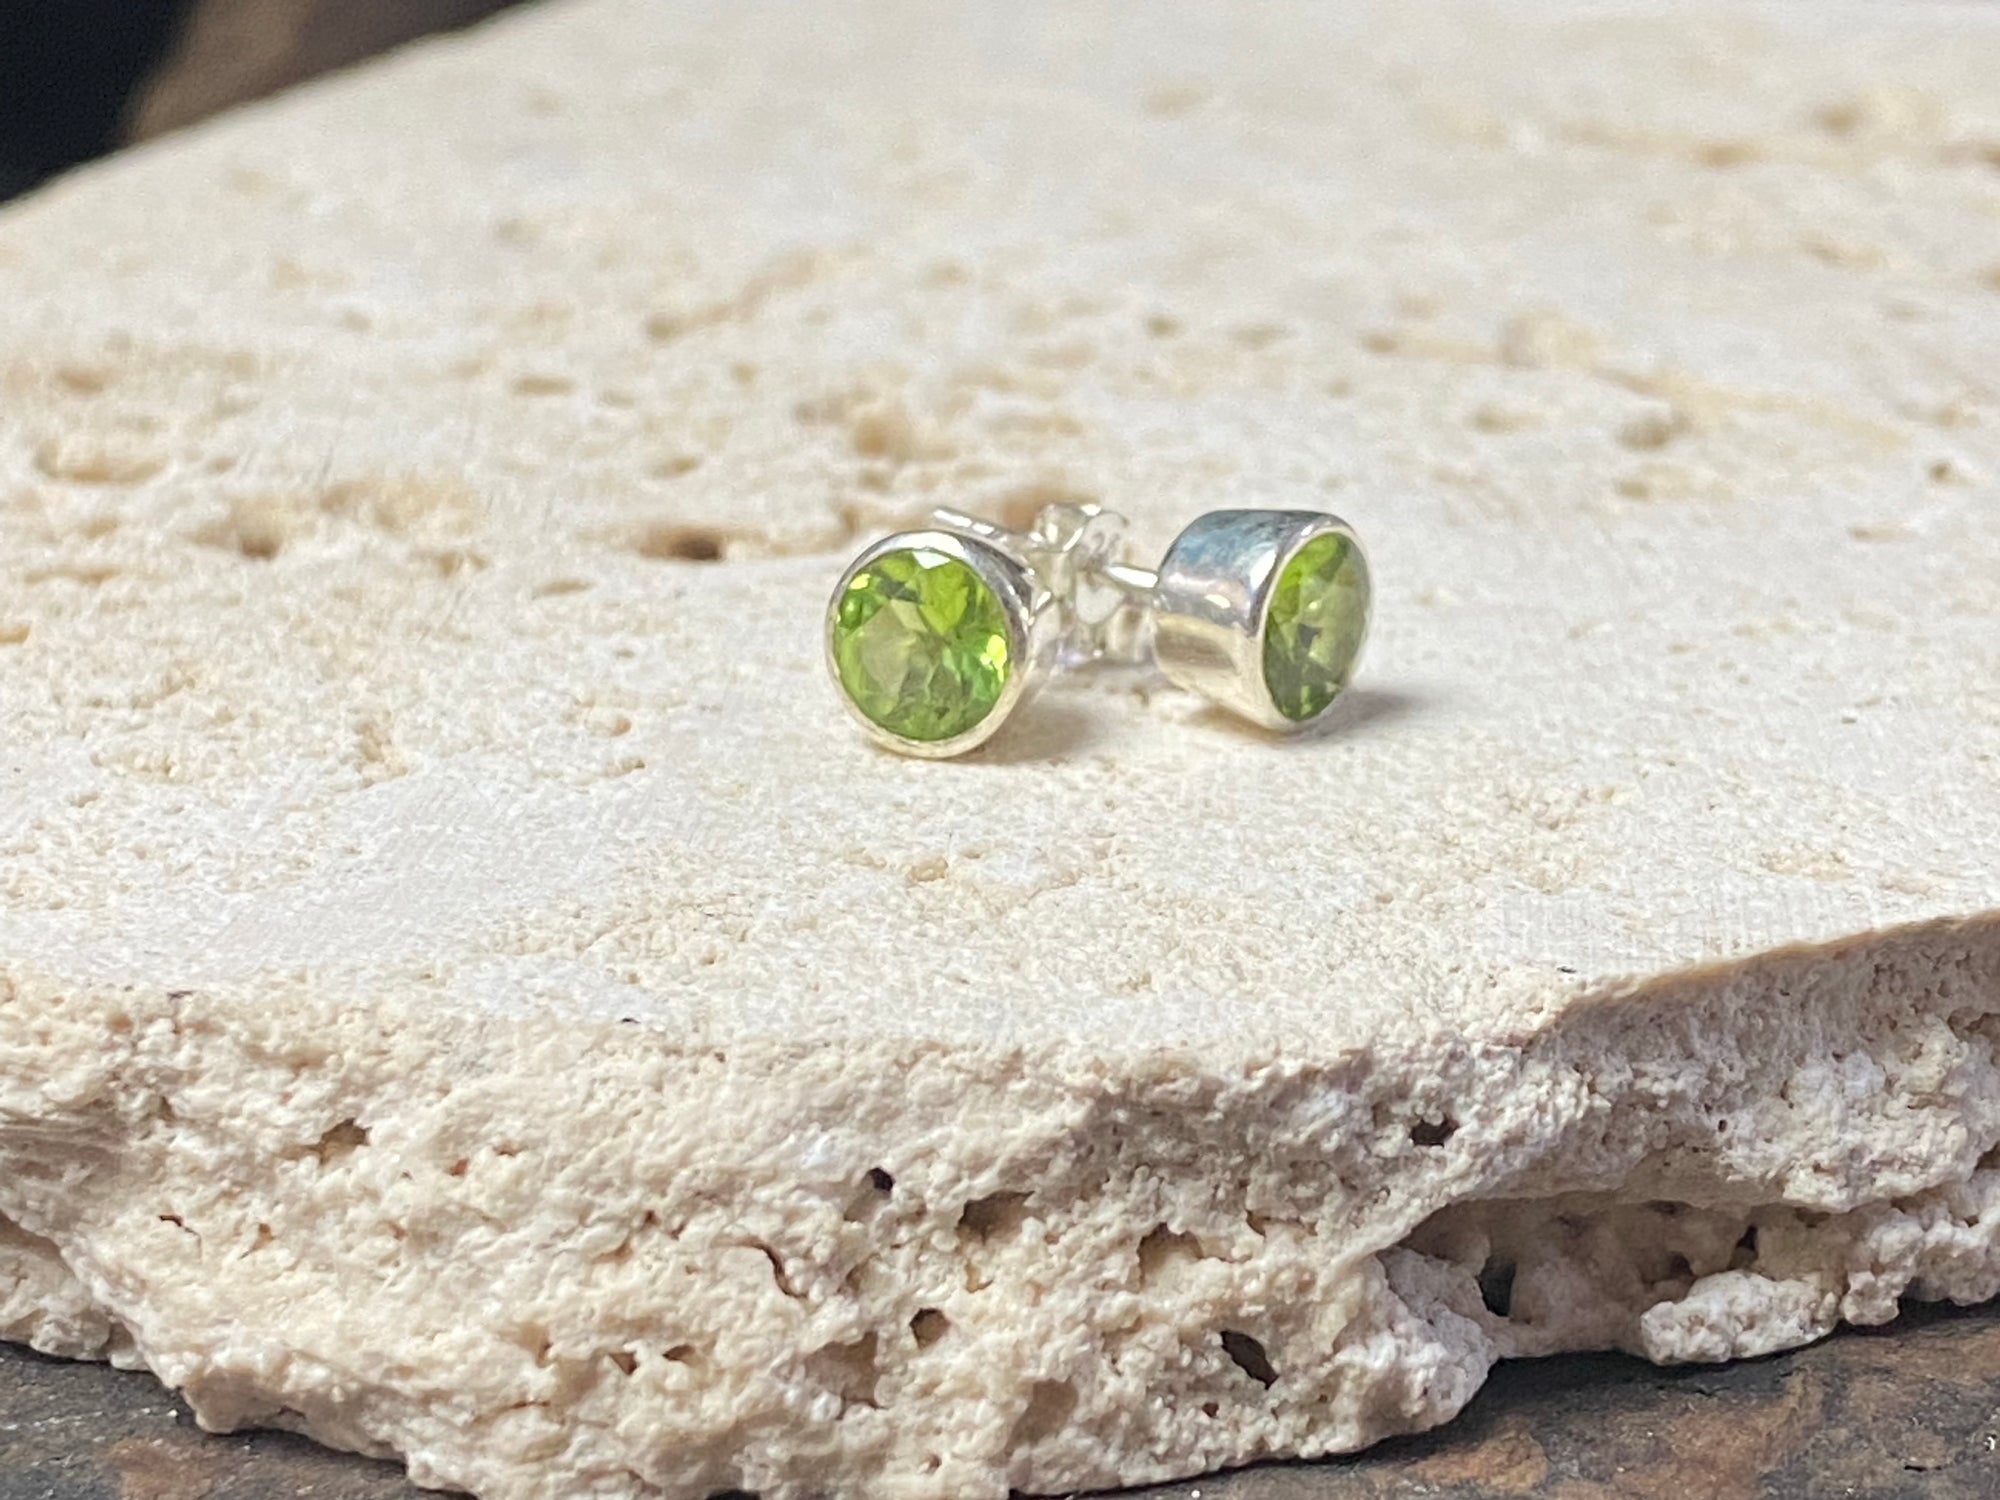 Elegant facet cut peridot and sterling silver earring studs, diameter 7 mm height 5 mm